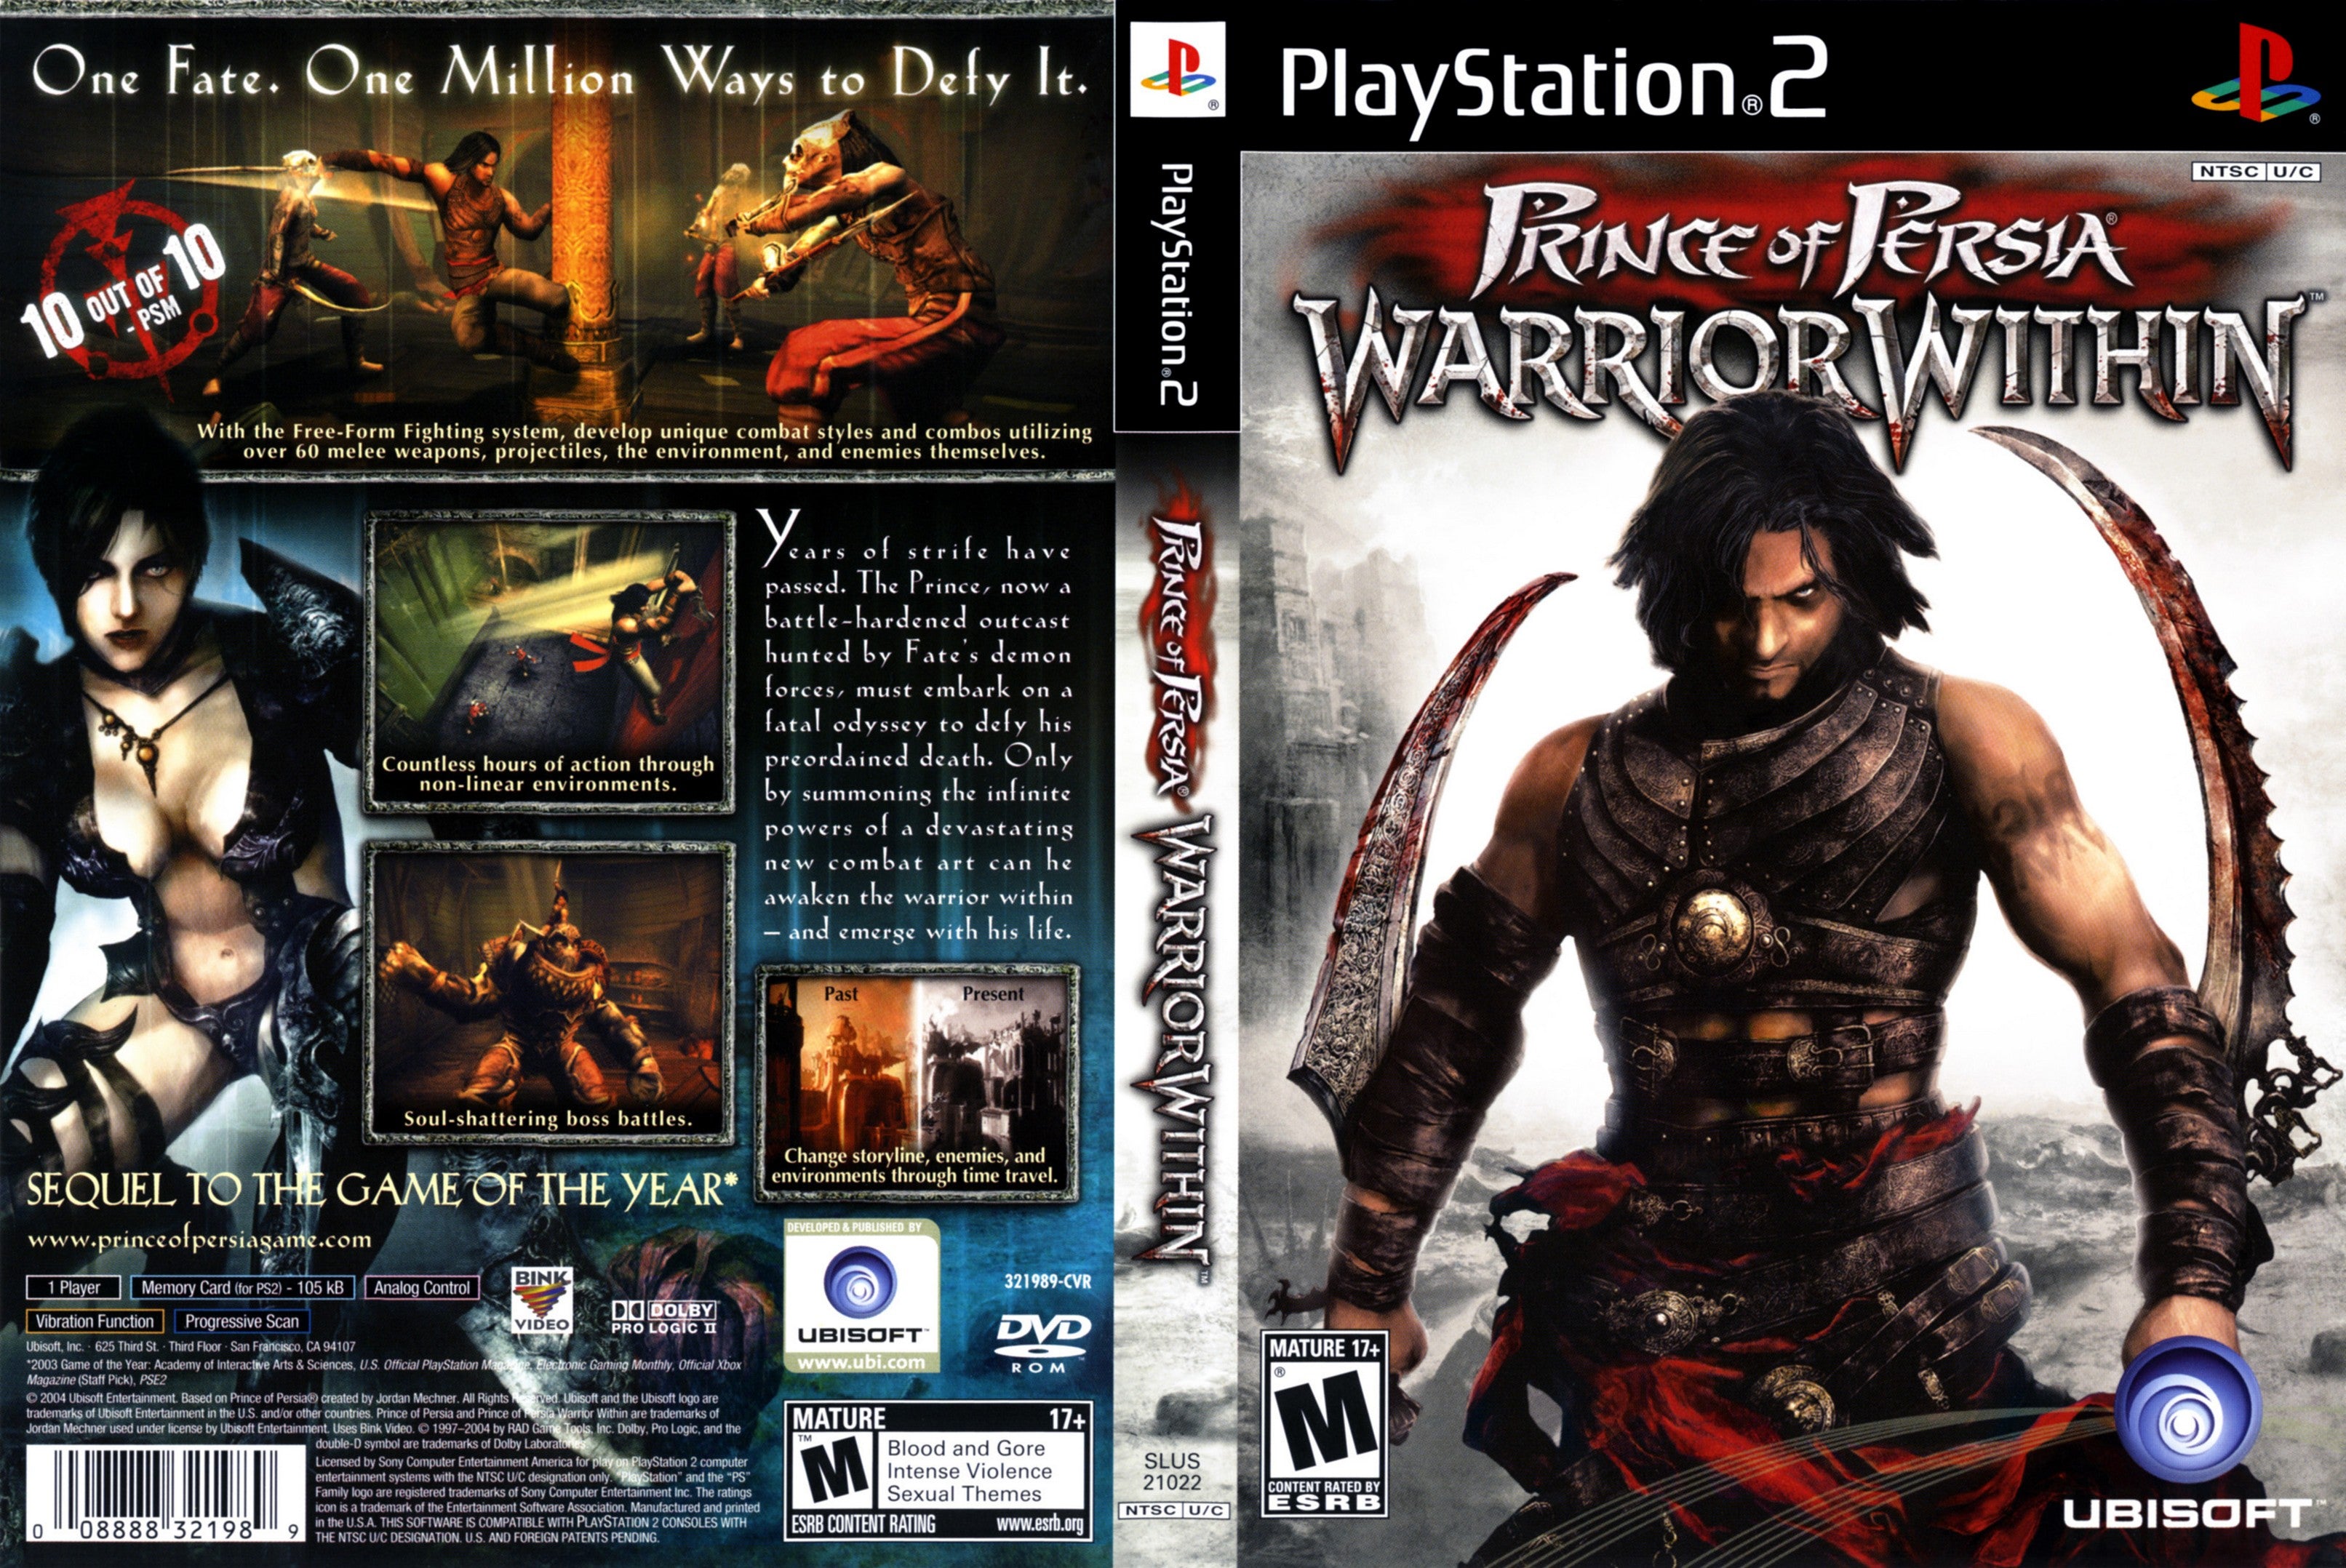 Prince of Persia: Warrior Within for PlayStation 2